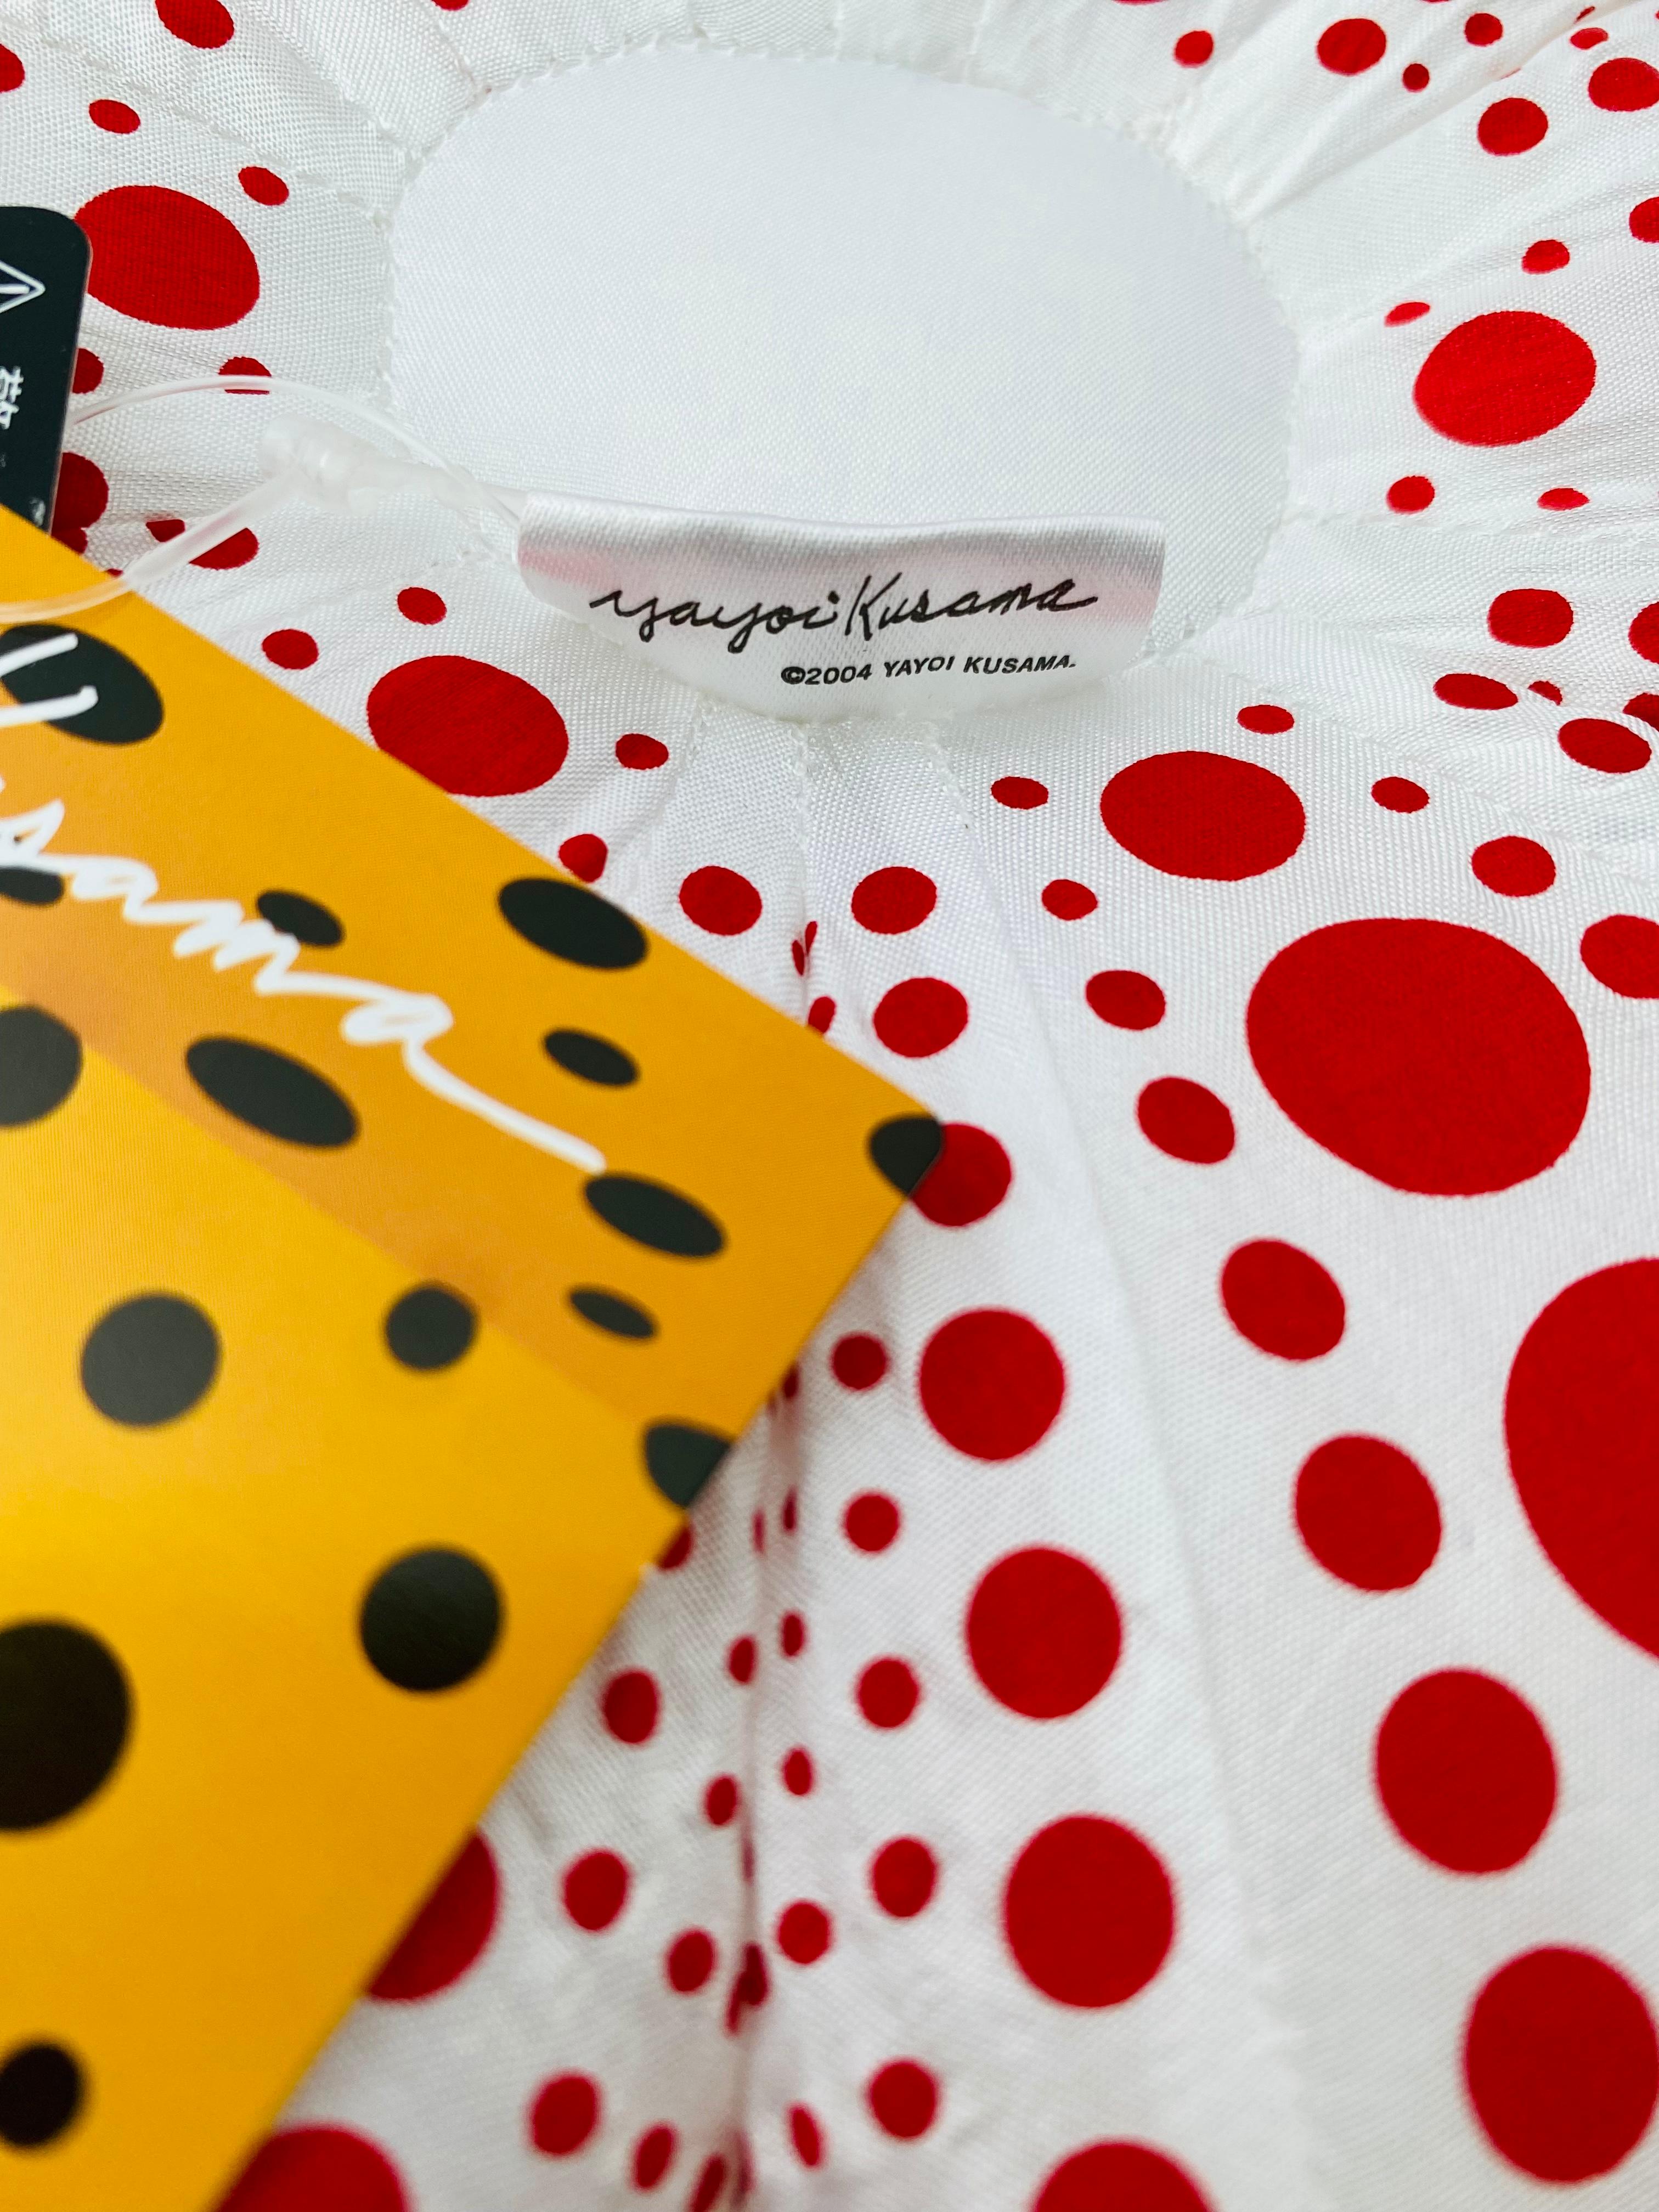 Yayoi Kusama Red & White Pumpkin (plush):
An iconic, vibrantly colored pop art piece - this Kusama plush pumpkin features the universal polka dot patterns and bold colors for which the artist is perhaps best known. Kusama first used the pumpkin at